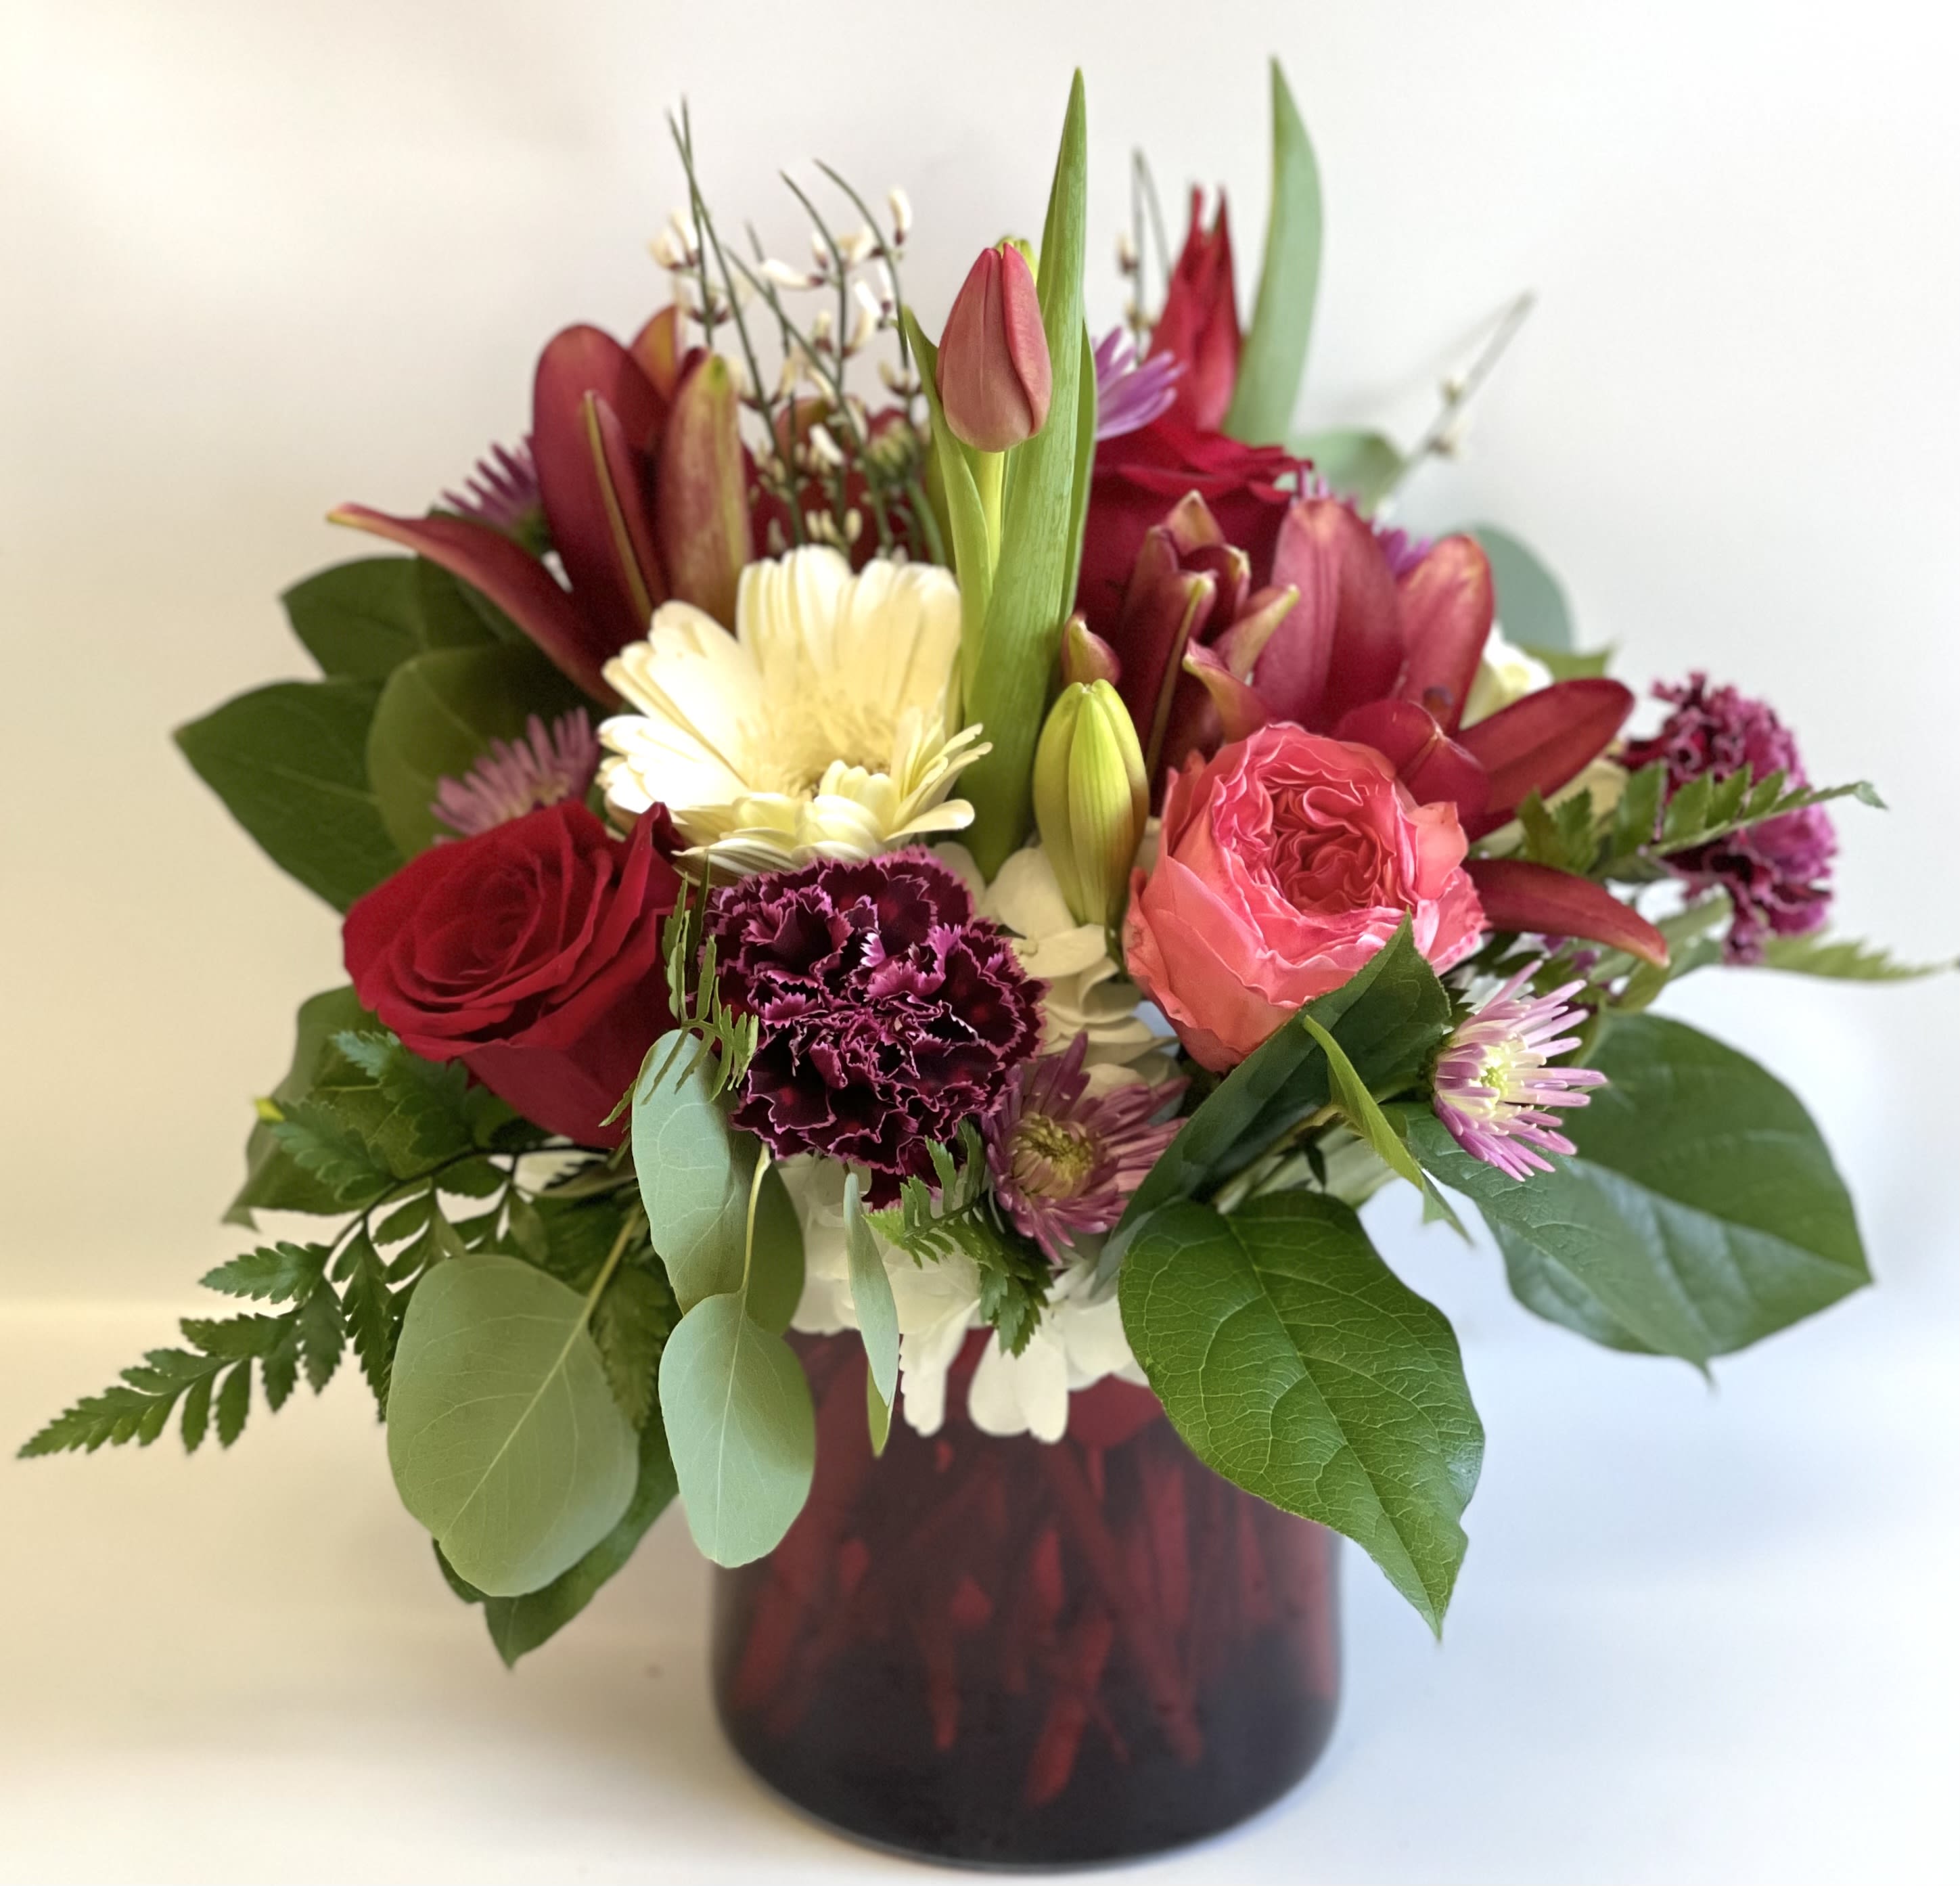 Secret Admirer by Barb’s Flowers - Let someone know you want them to have a Happy Valentine’s Day! This bouquet has so much including Garden Roses. 